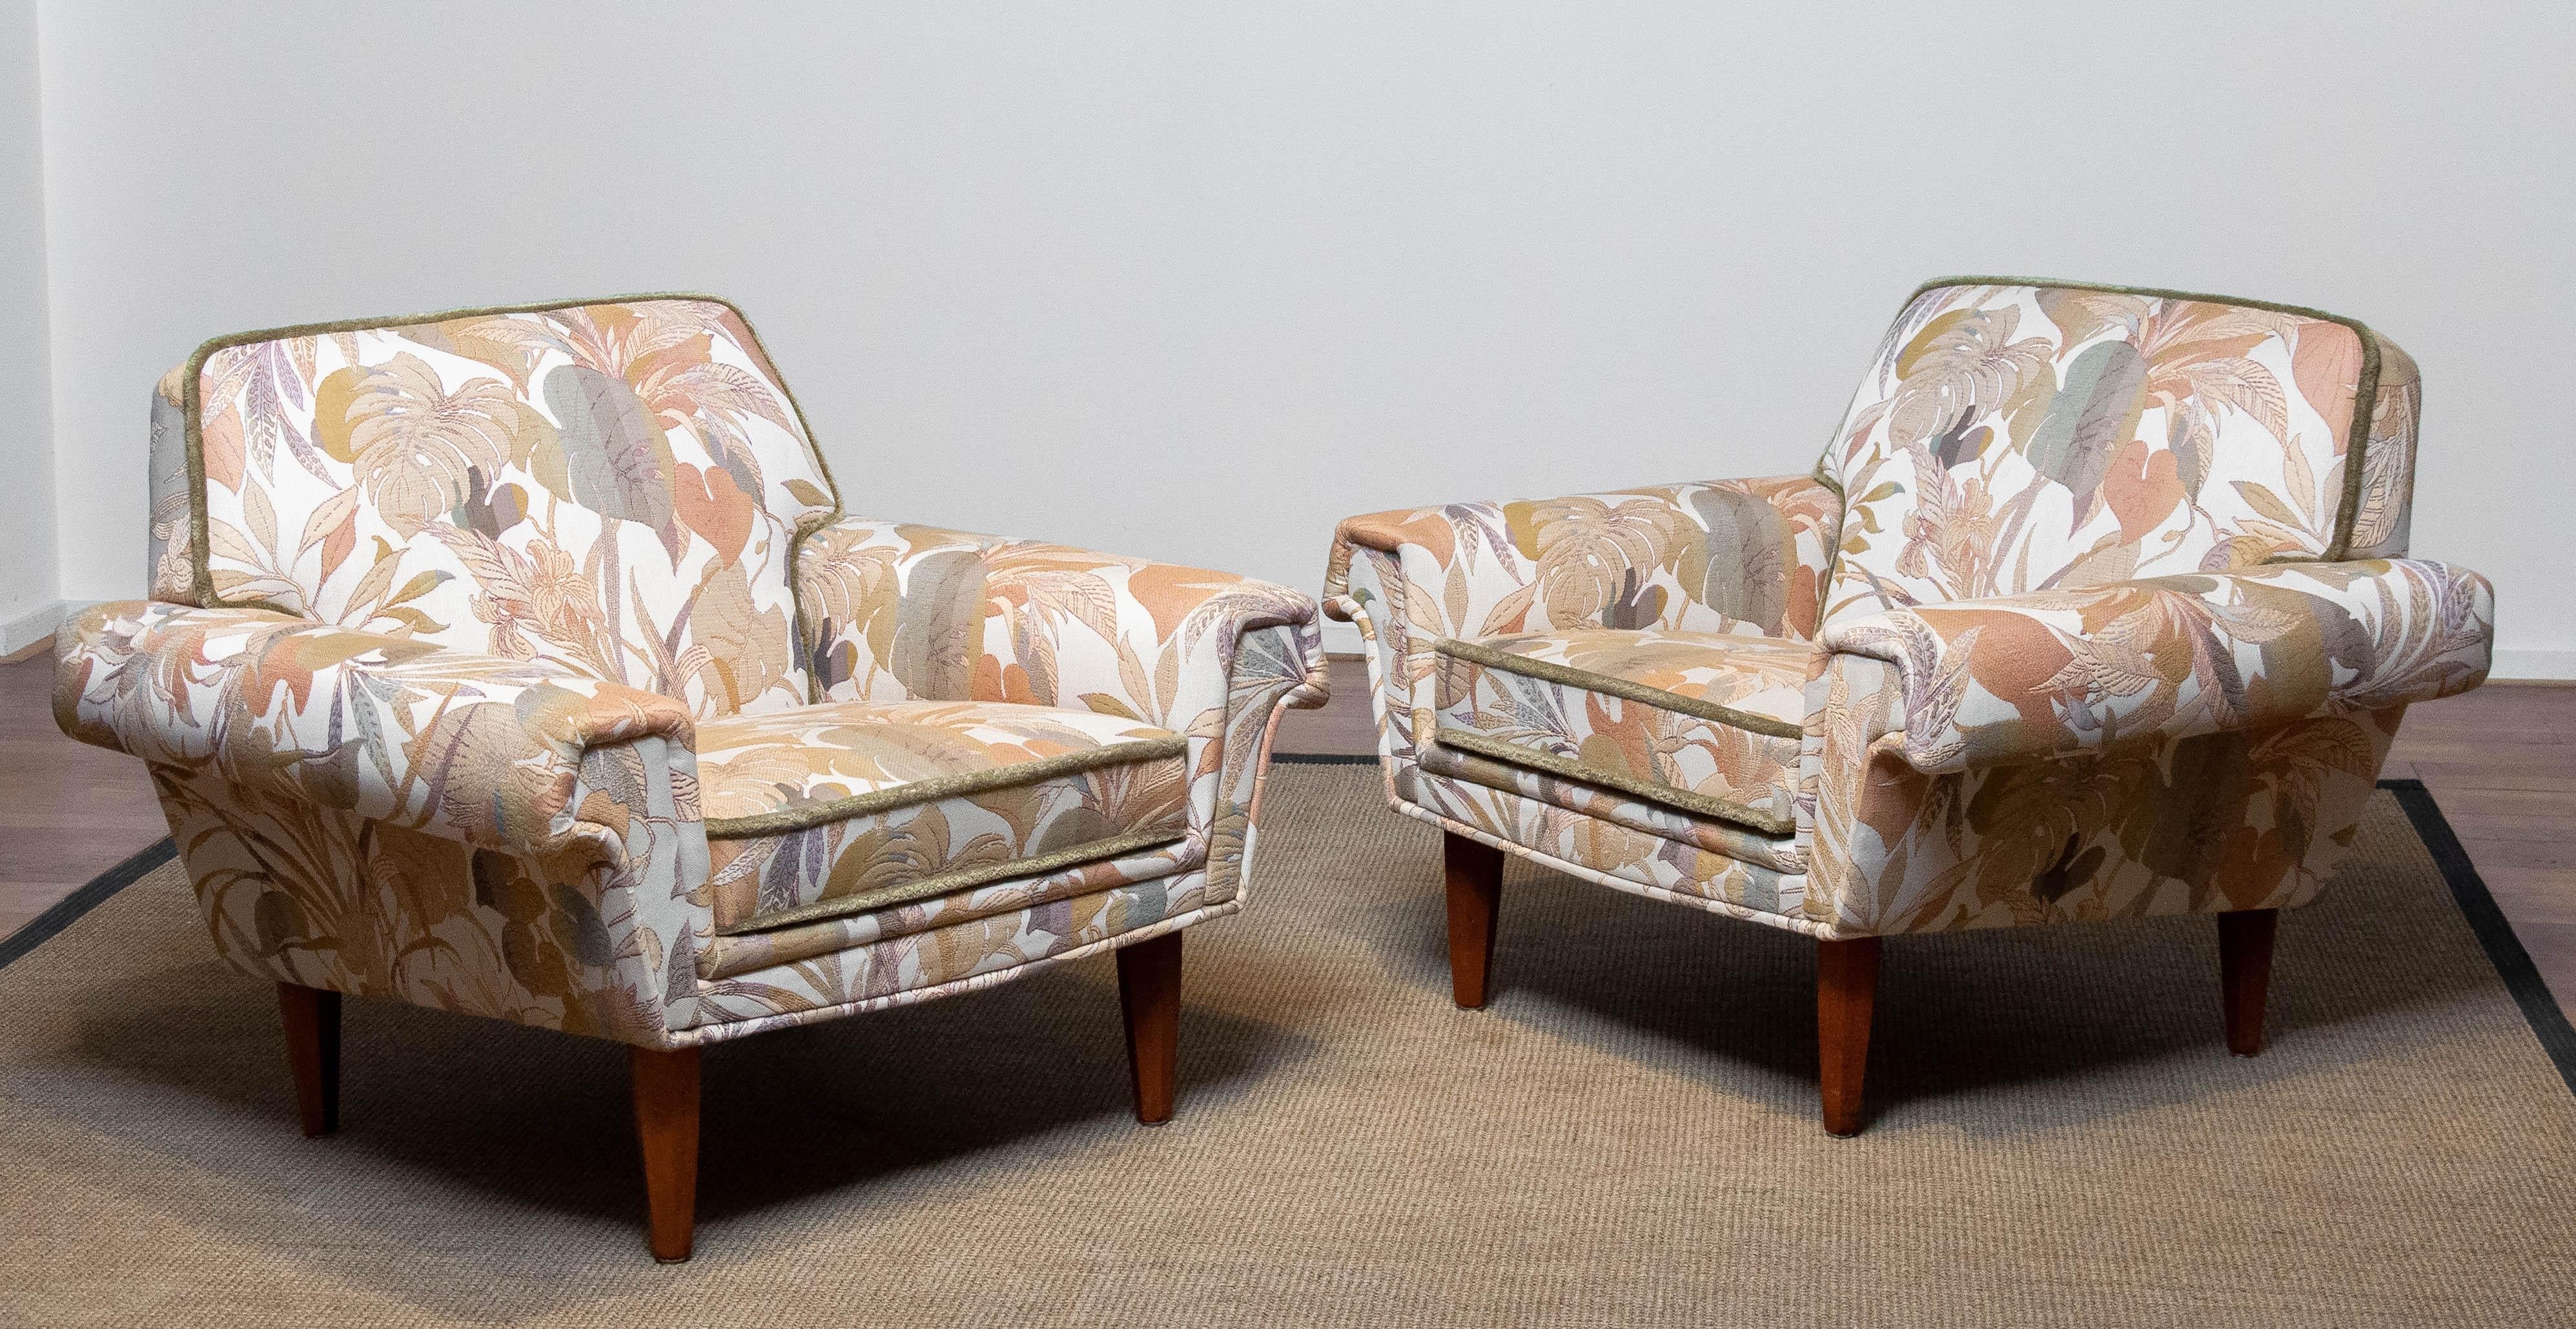 Excellent restored ( in the 1970's ) pair low back lounge / club chairs from Denmark originally from the 1950's and upholstered with superior quality and beautiful multi colored Jacquard fabric. Both chairs are in absolutely great and clean